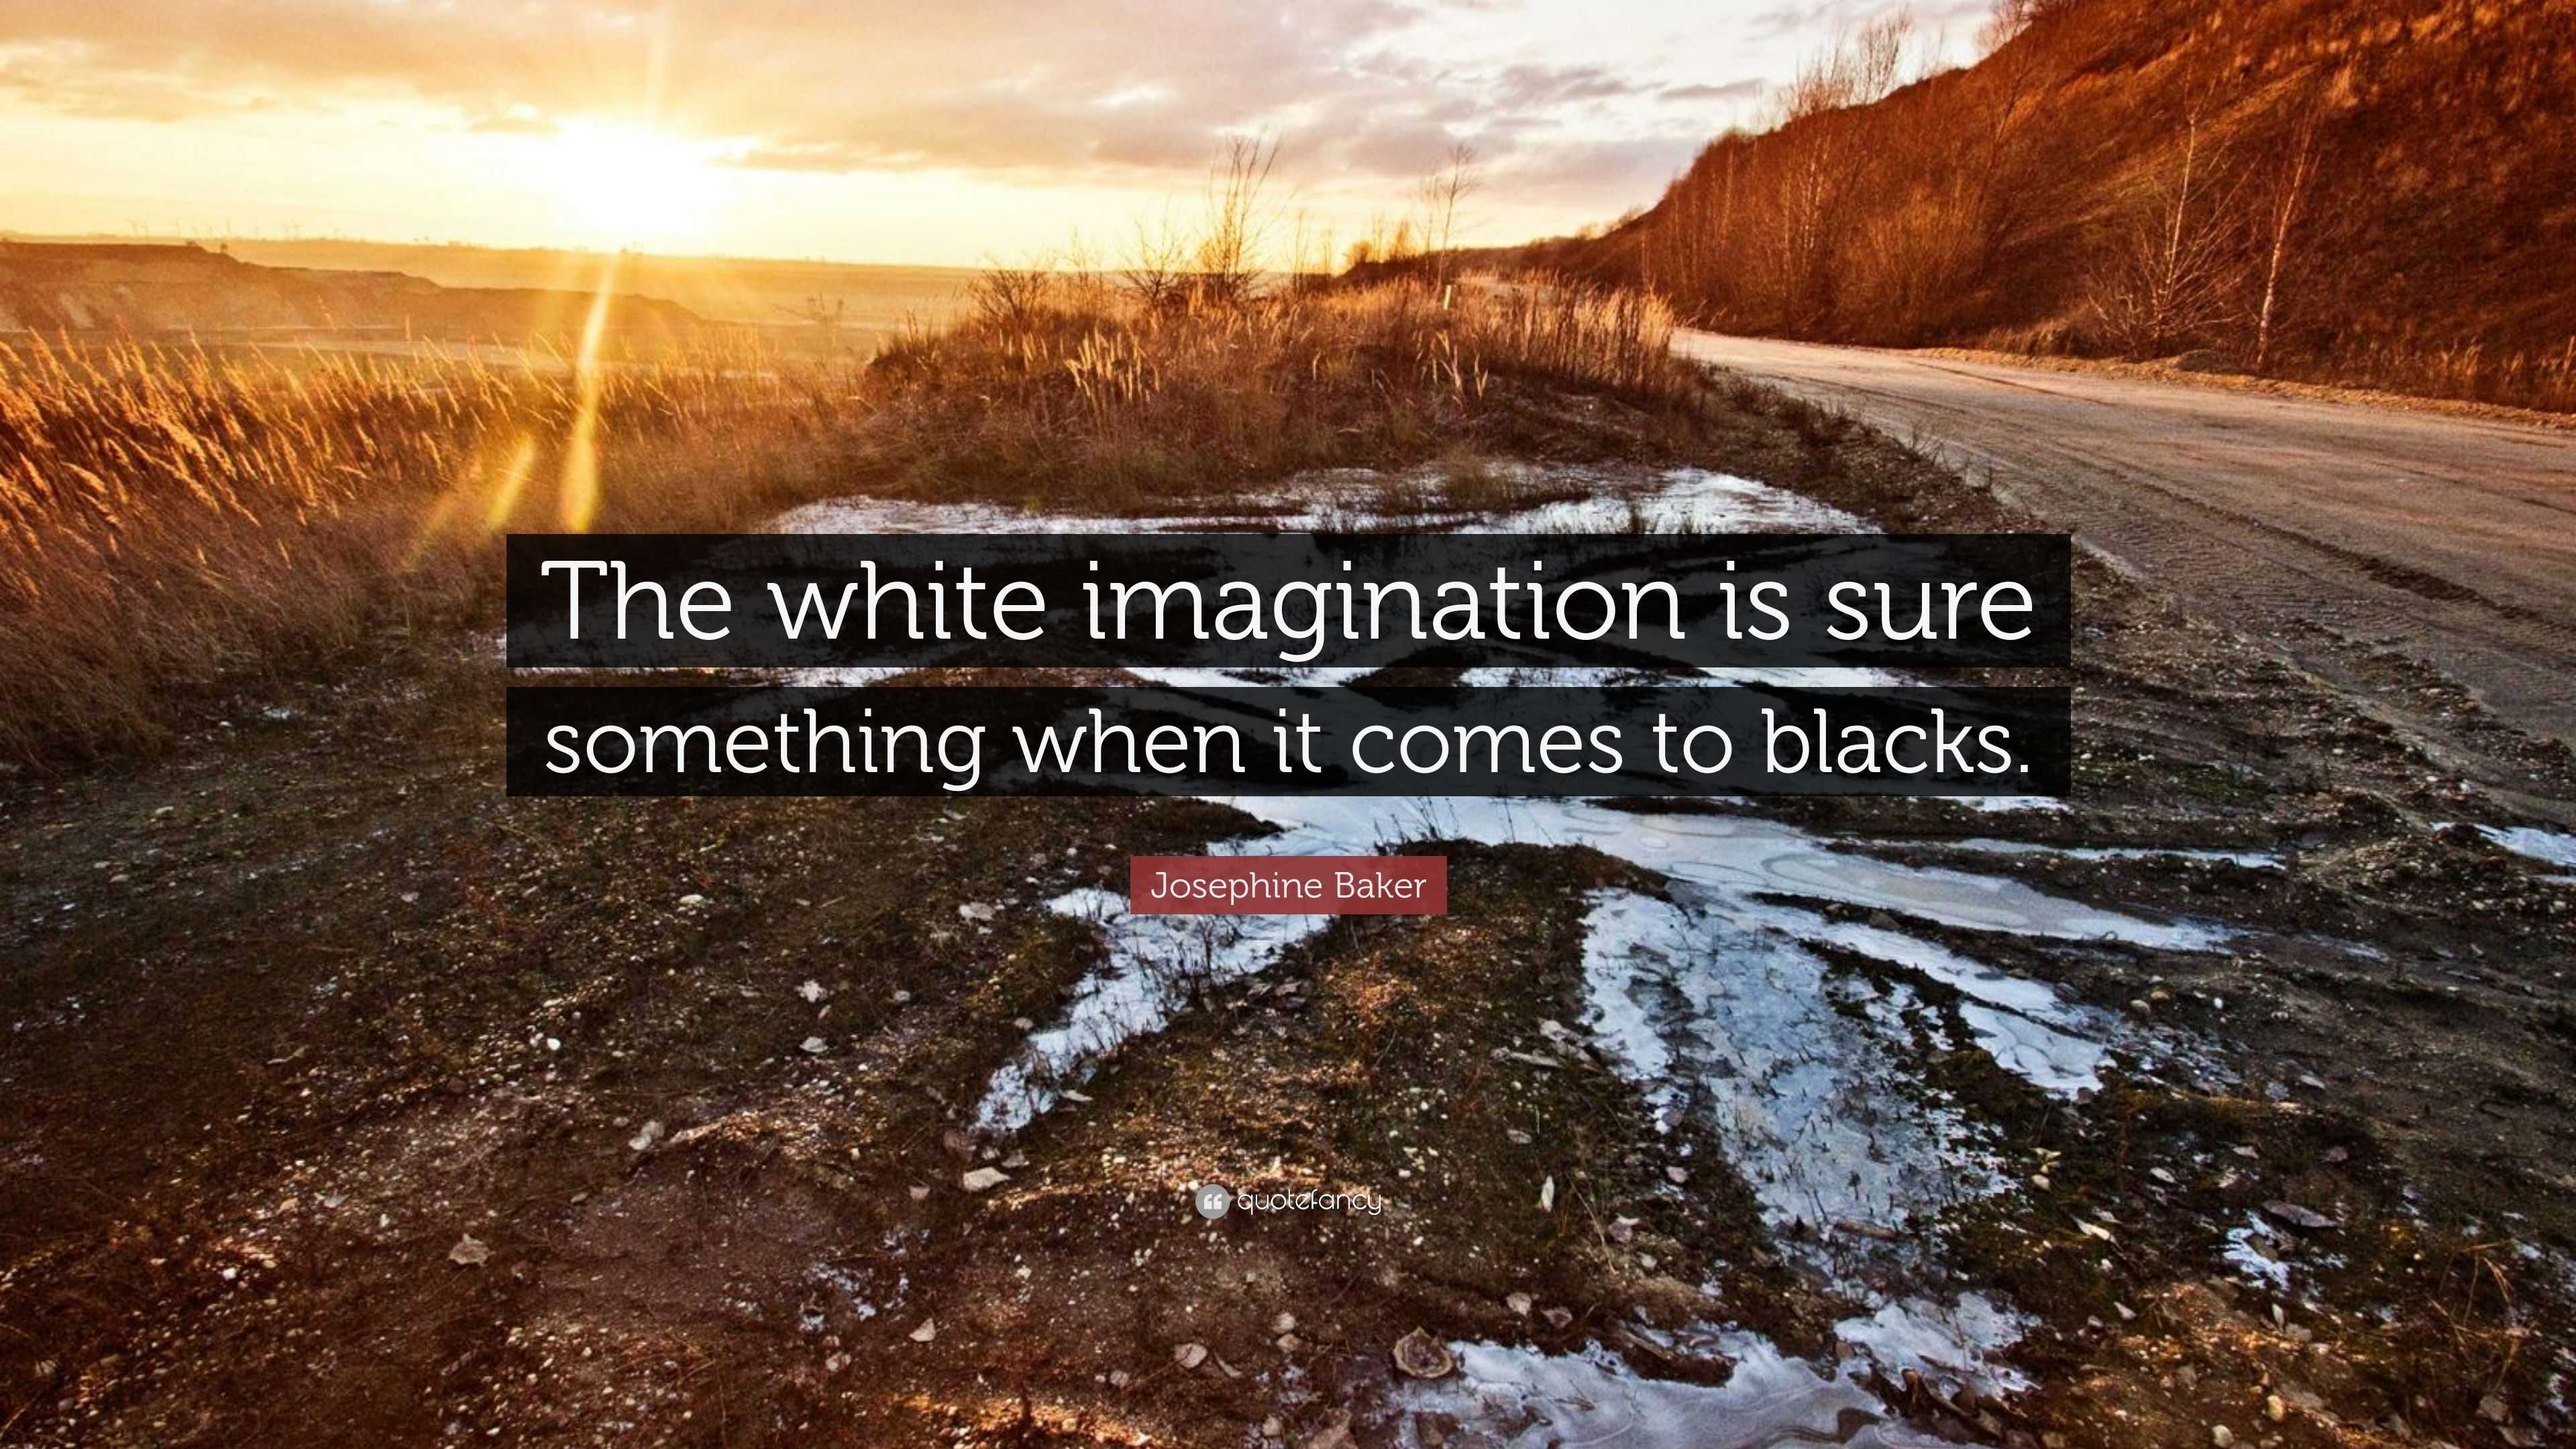 Josephine Baker Quote: “The white imagination is sure something when it ...